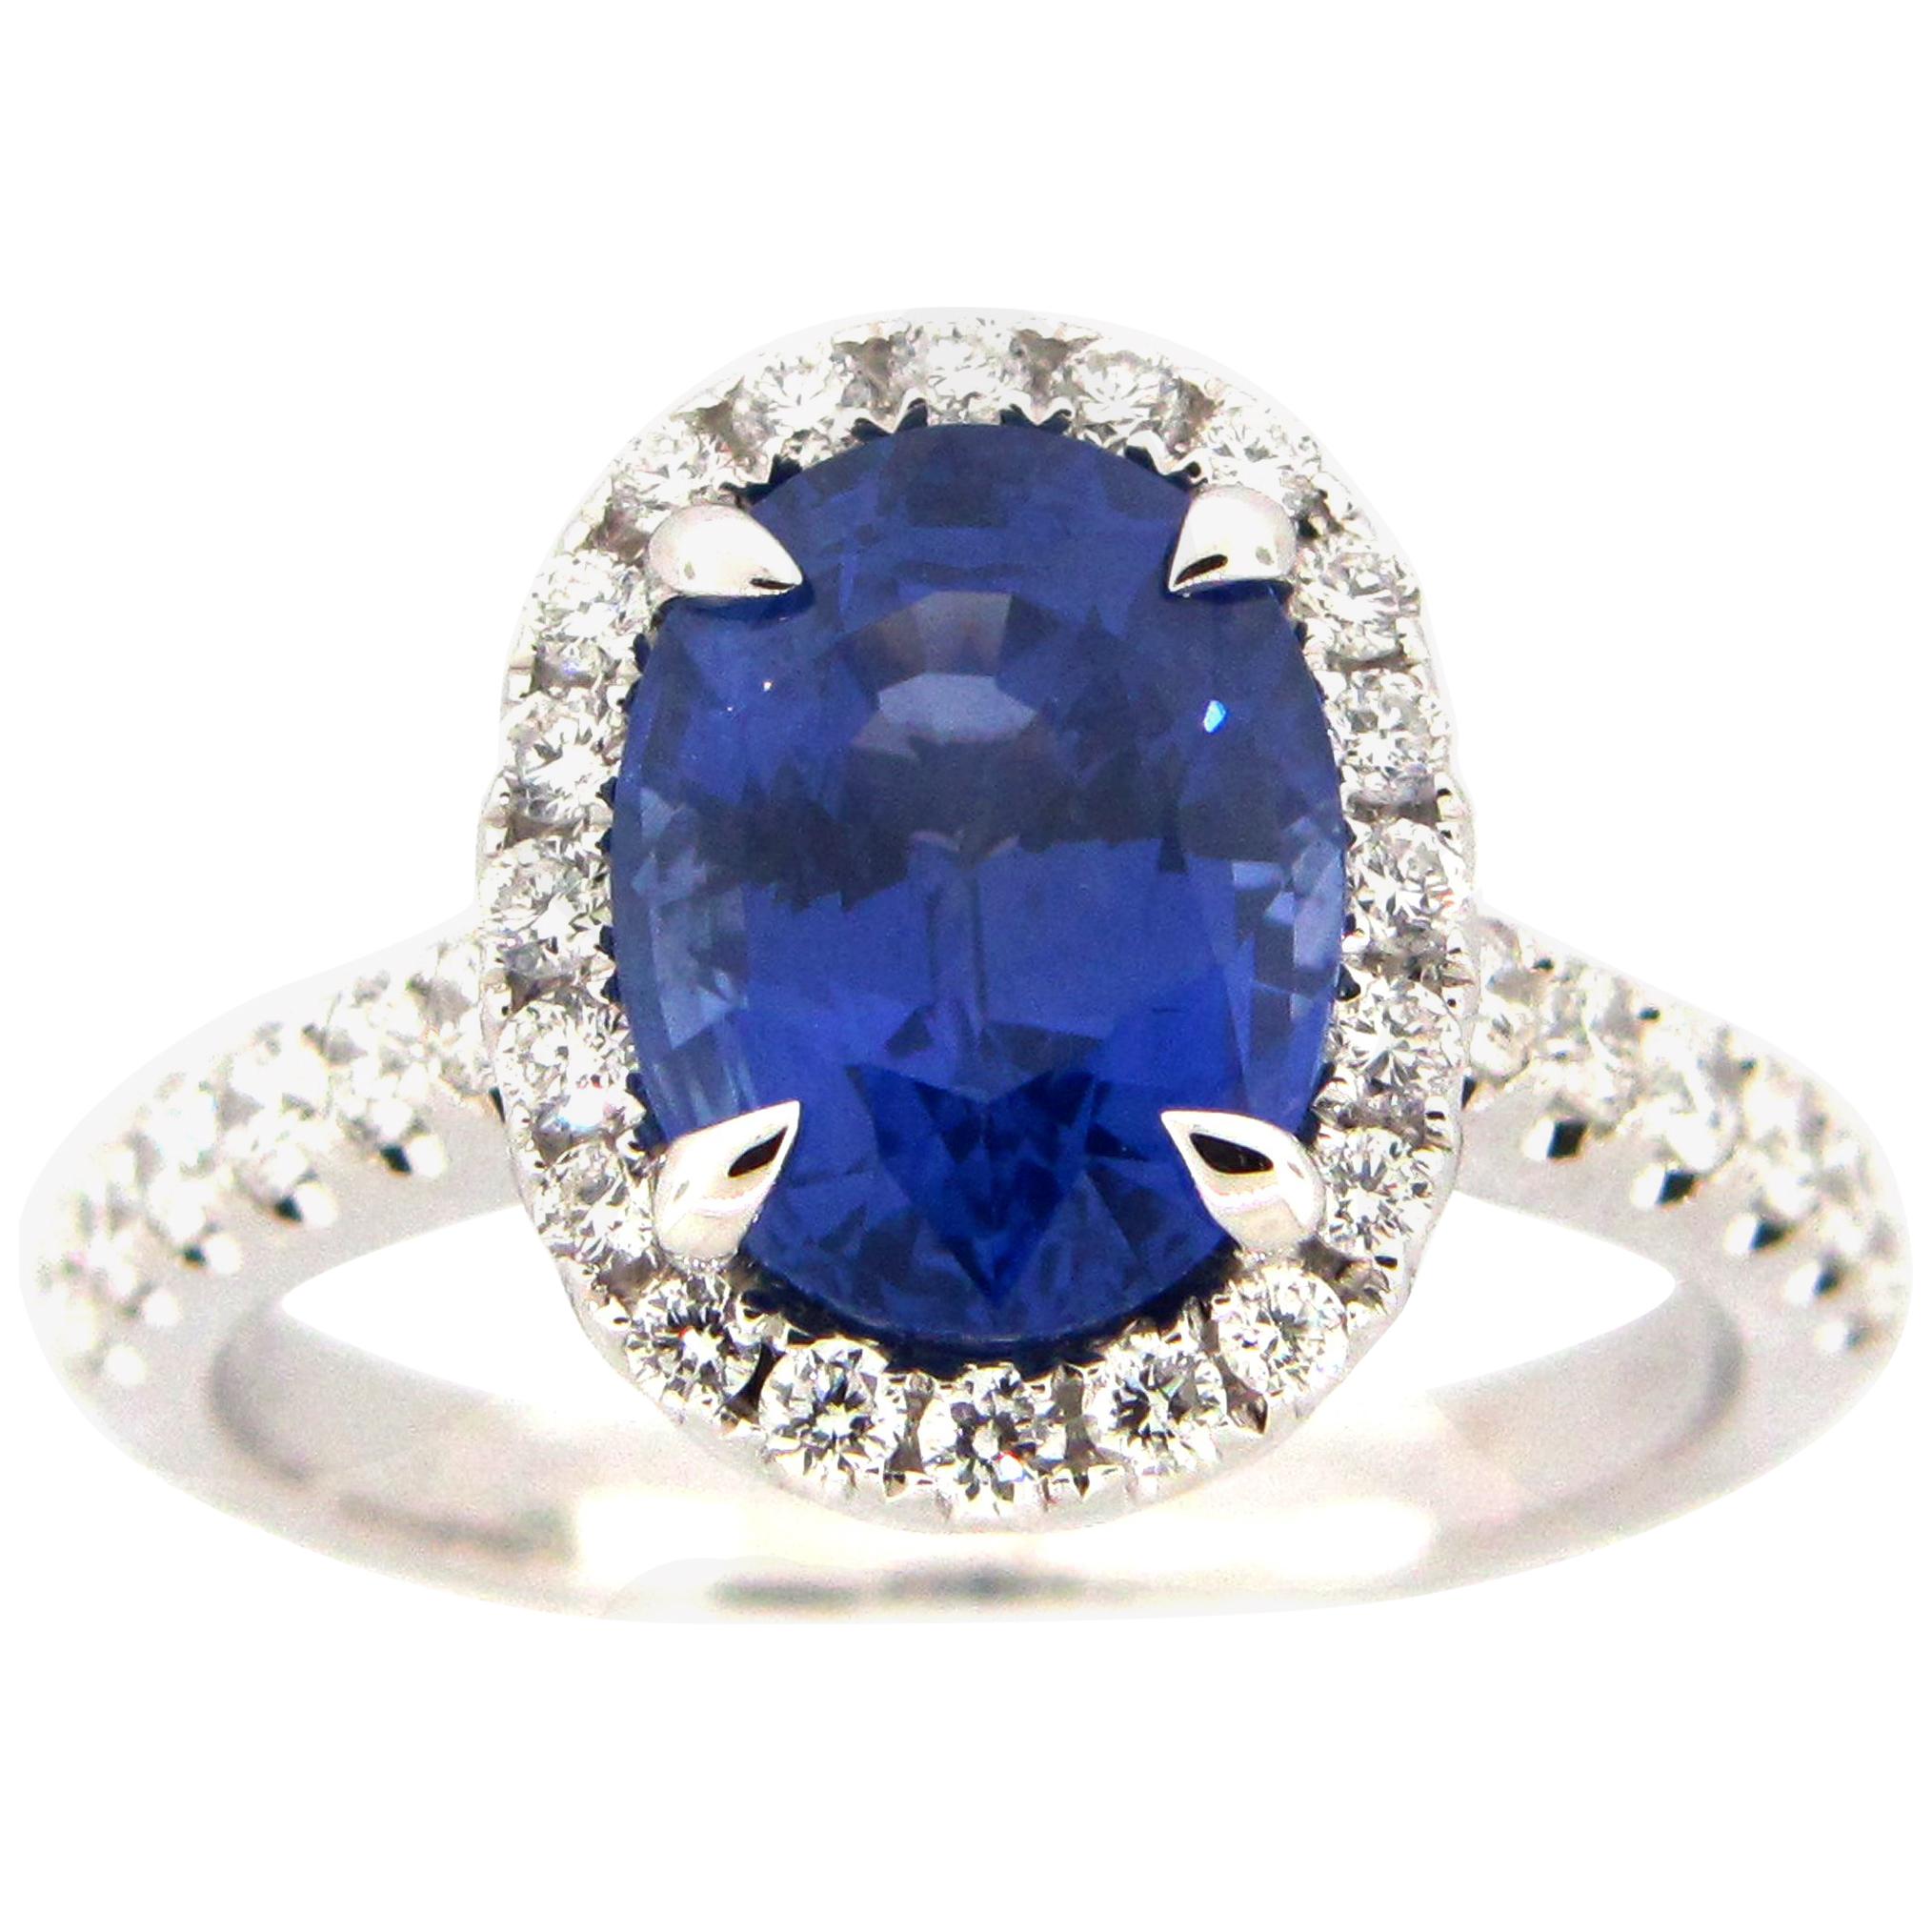 3.84 Carat Oval Sapphire and Diamond Cocktail Ring